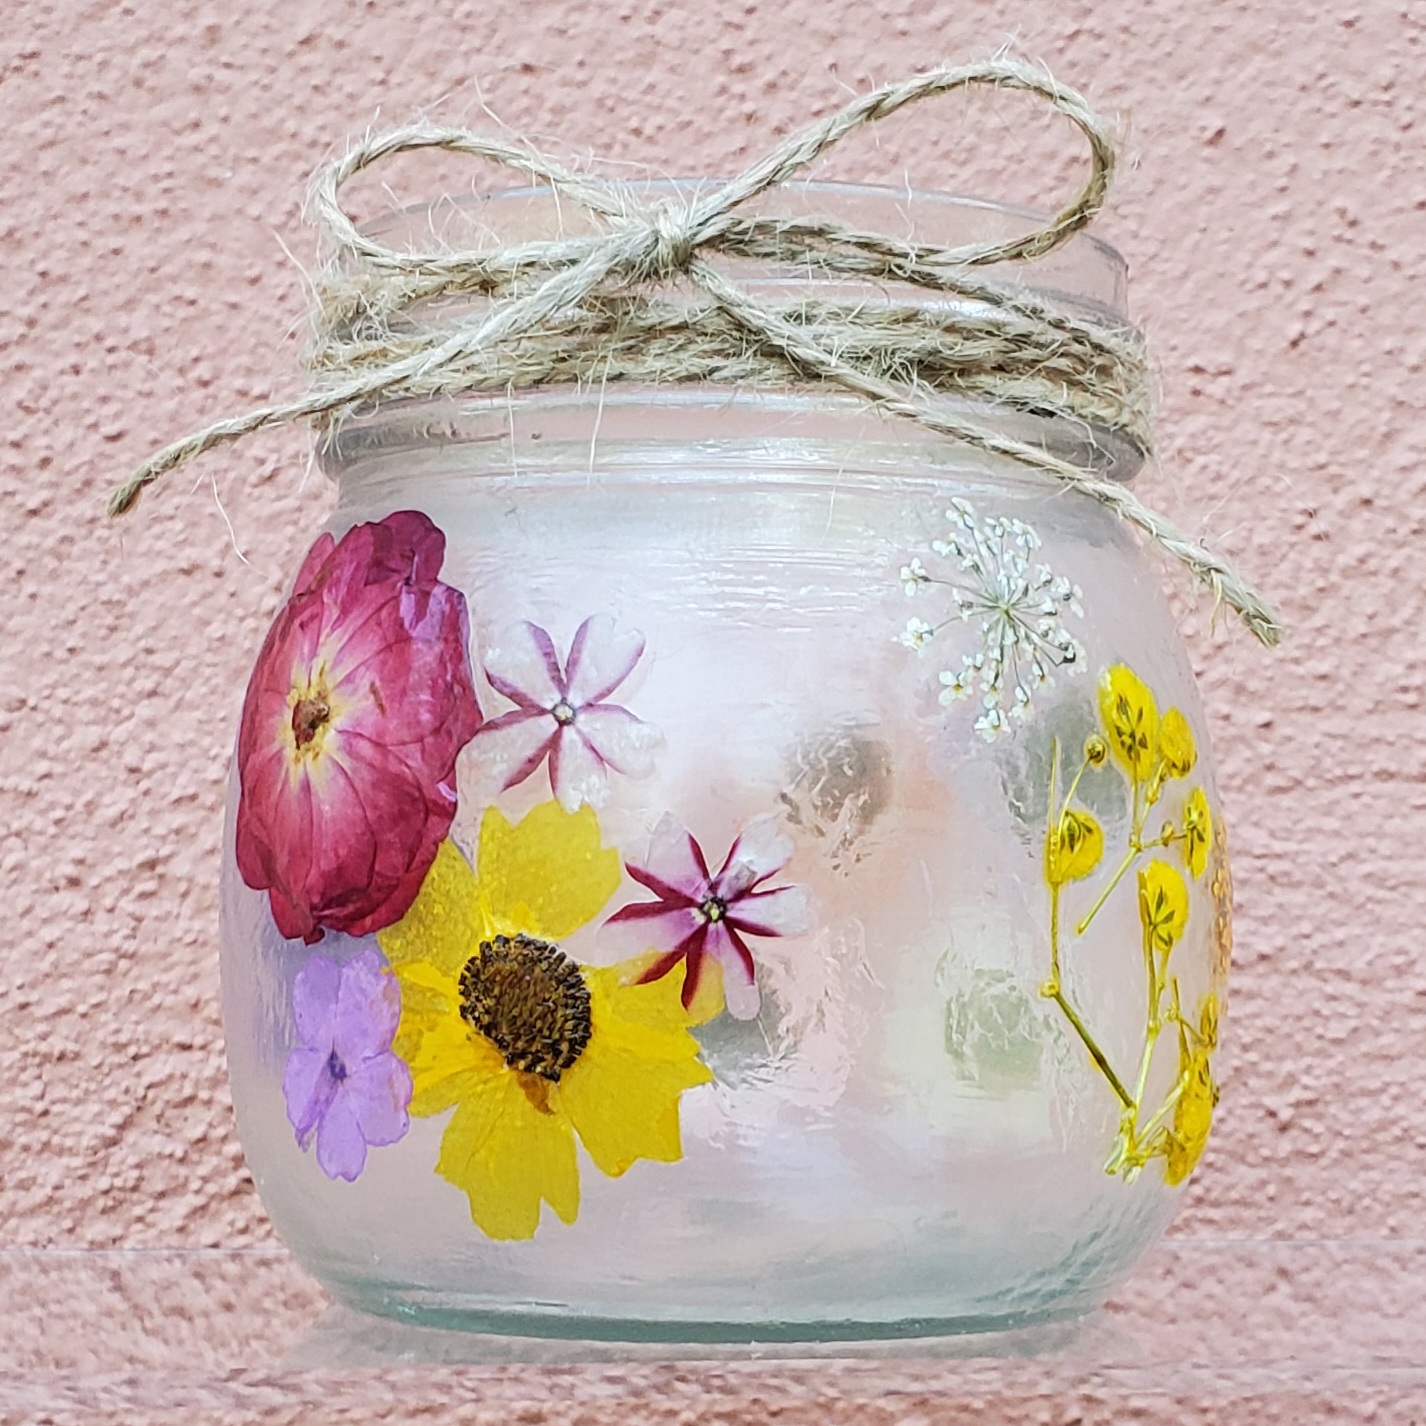 Small glass jar with pressed flowers and twine bow